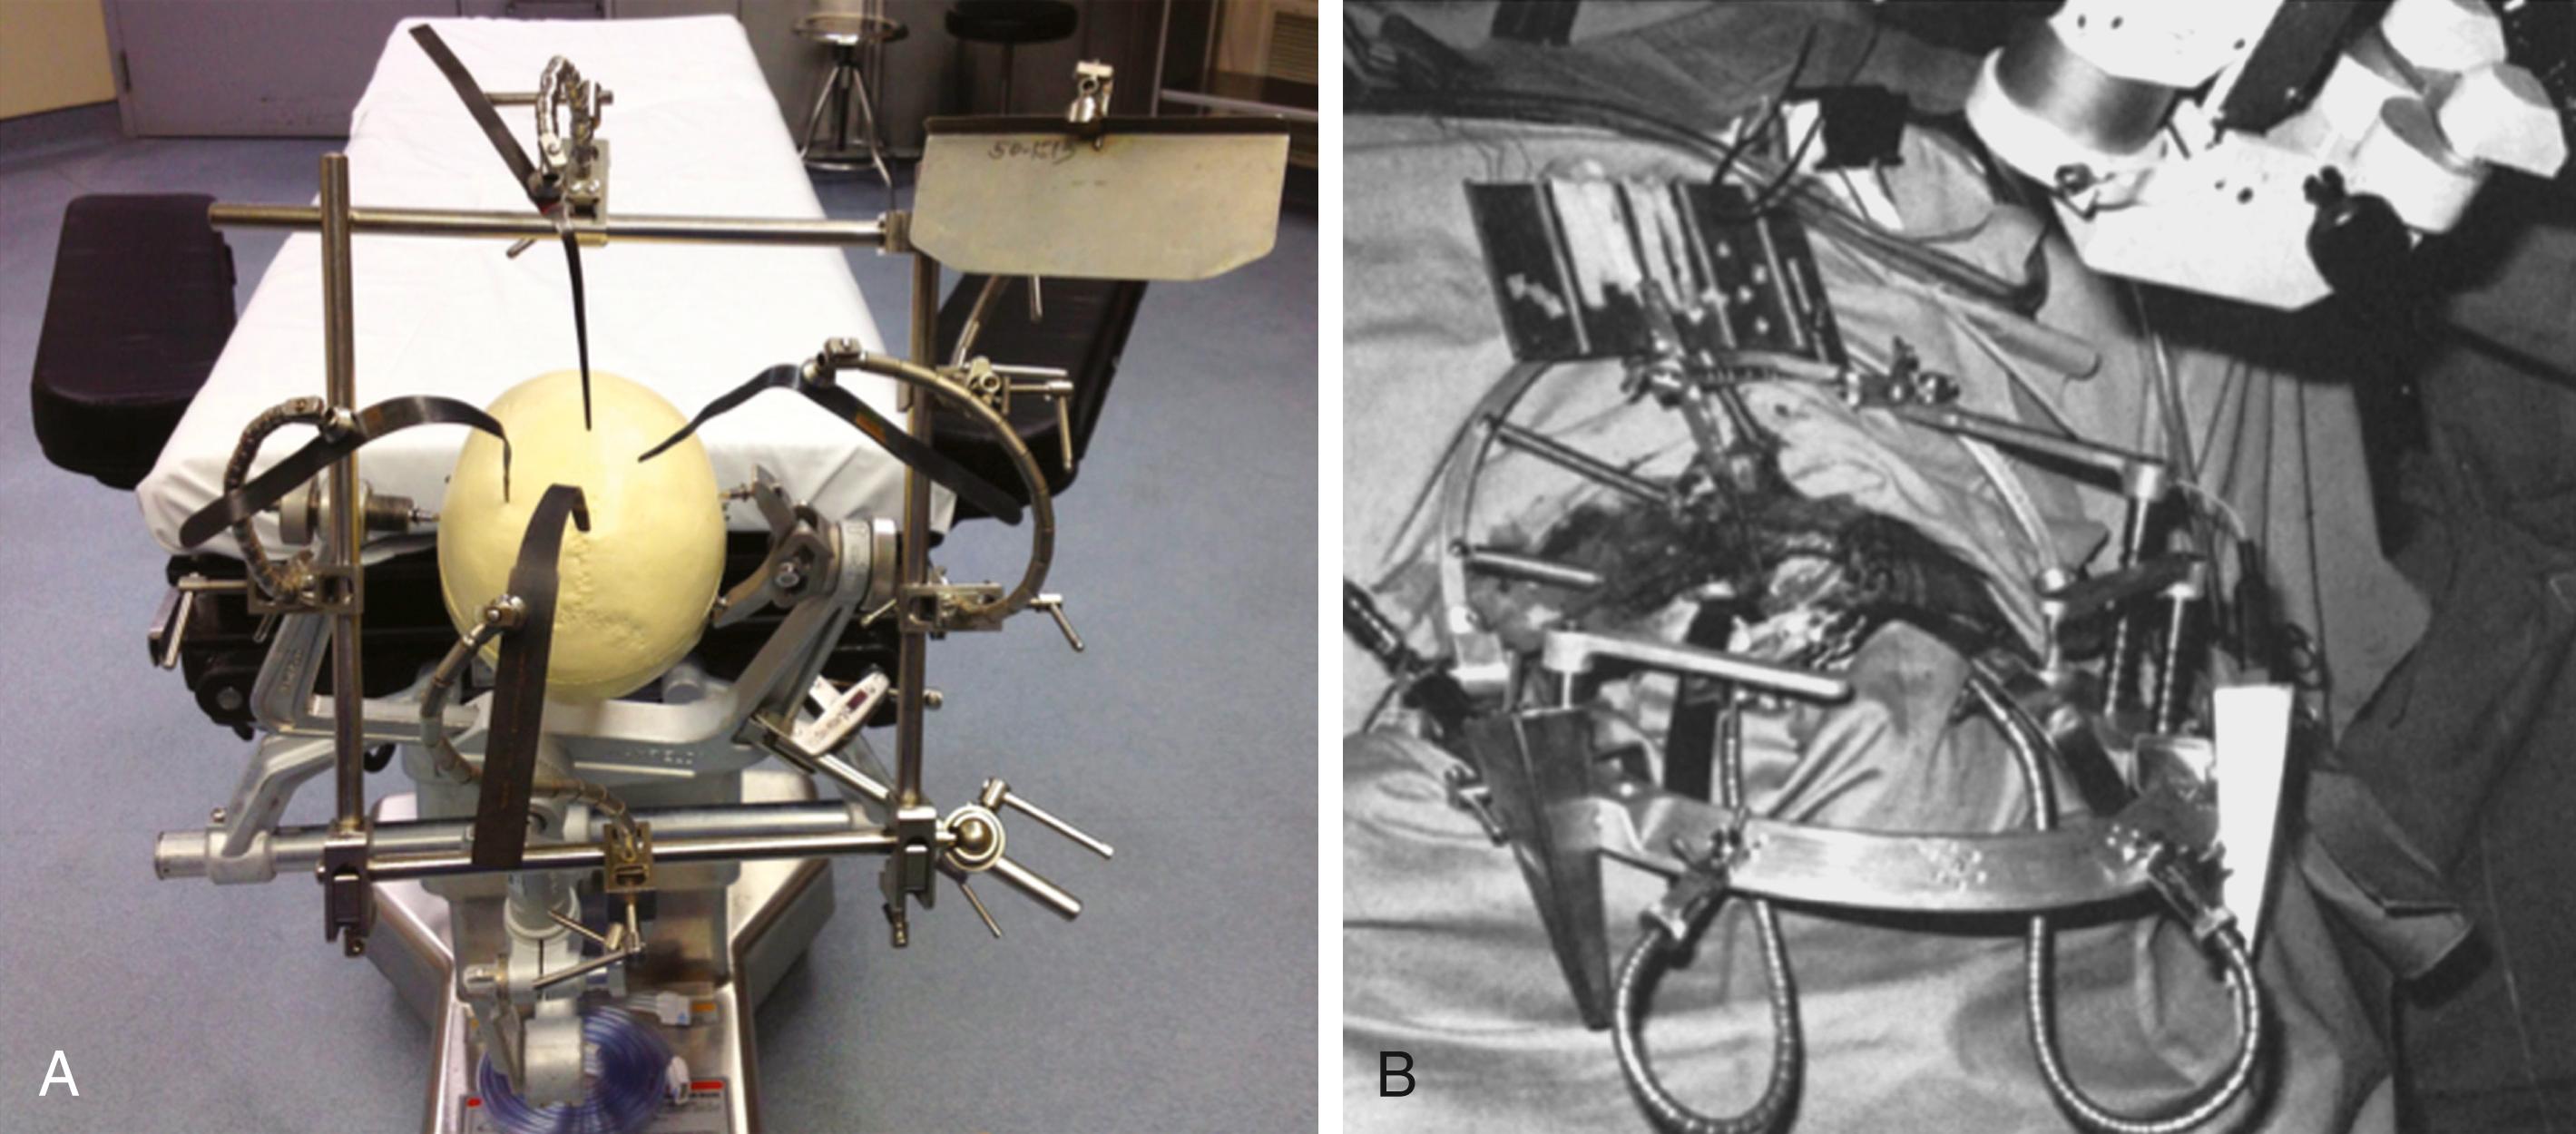 eFigure 33.12, (A) The Greenberg staircase organization technique described in 1981 to support microinstruments. It consists of multiple flexible ball-cable retractor arms that are attached to a squared framework around the operative field. (B) Photograph of the Sugita head frame with handrests and microneurosurgical accessories described by Sugita and colleagues in 1978. The head holder is strong enough to hold both the patient’s head and the accessories such as bipolar coagulation device, forceps, suction tubes, or other instruments, along with the self-retaining retractor.